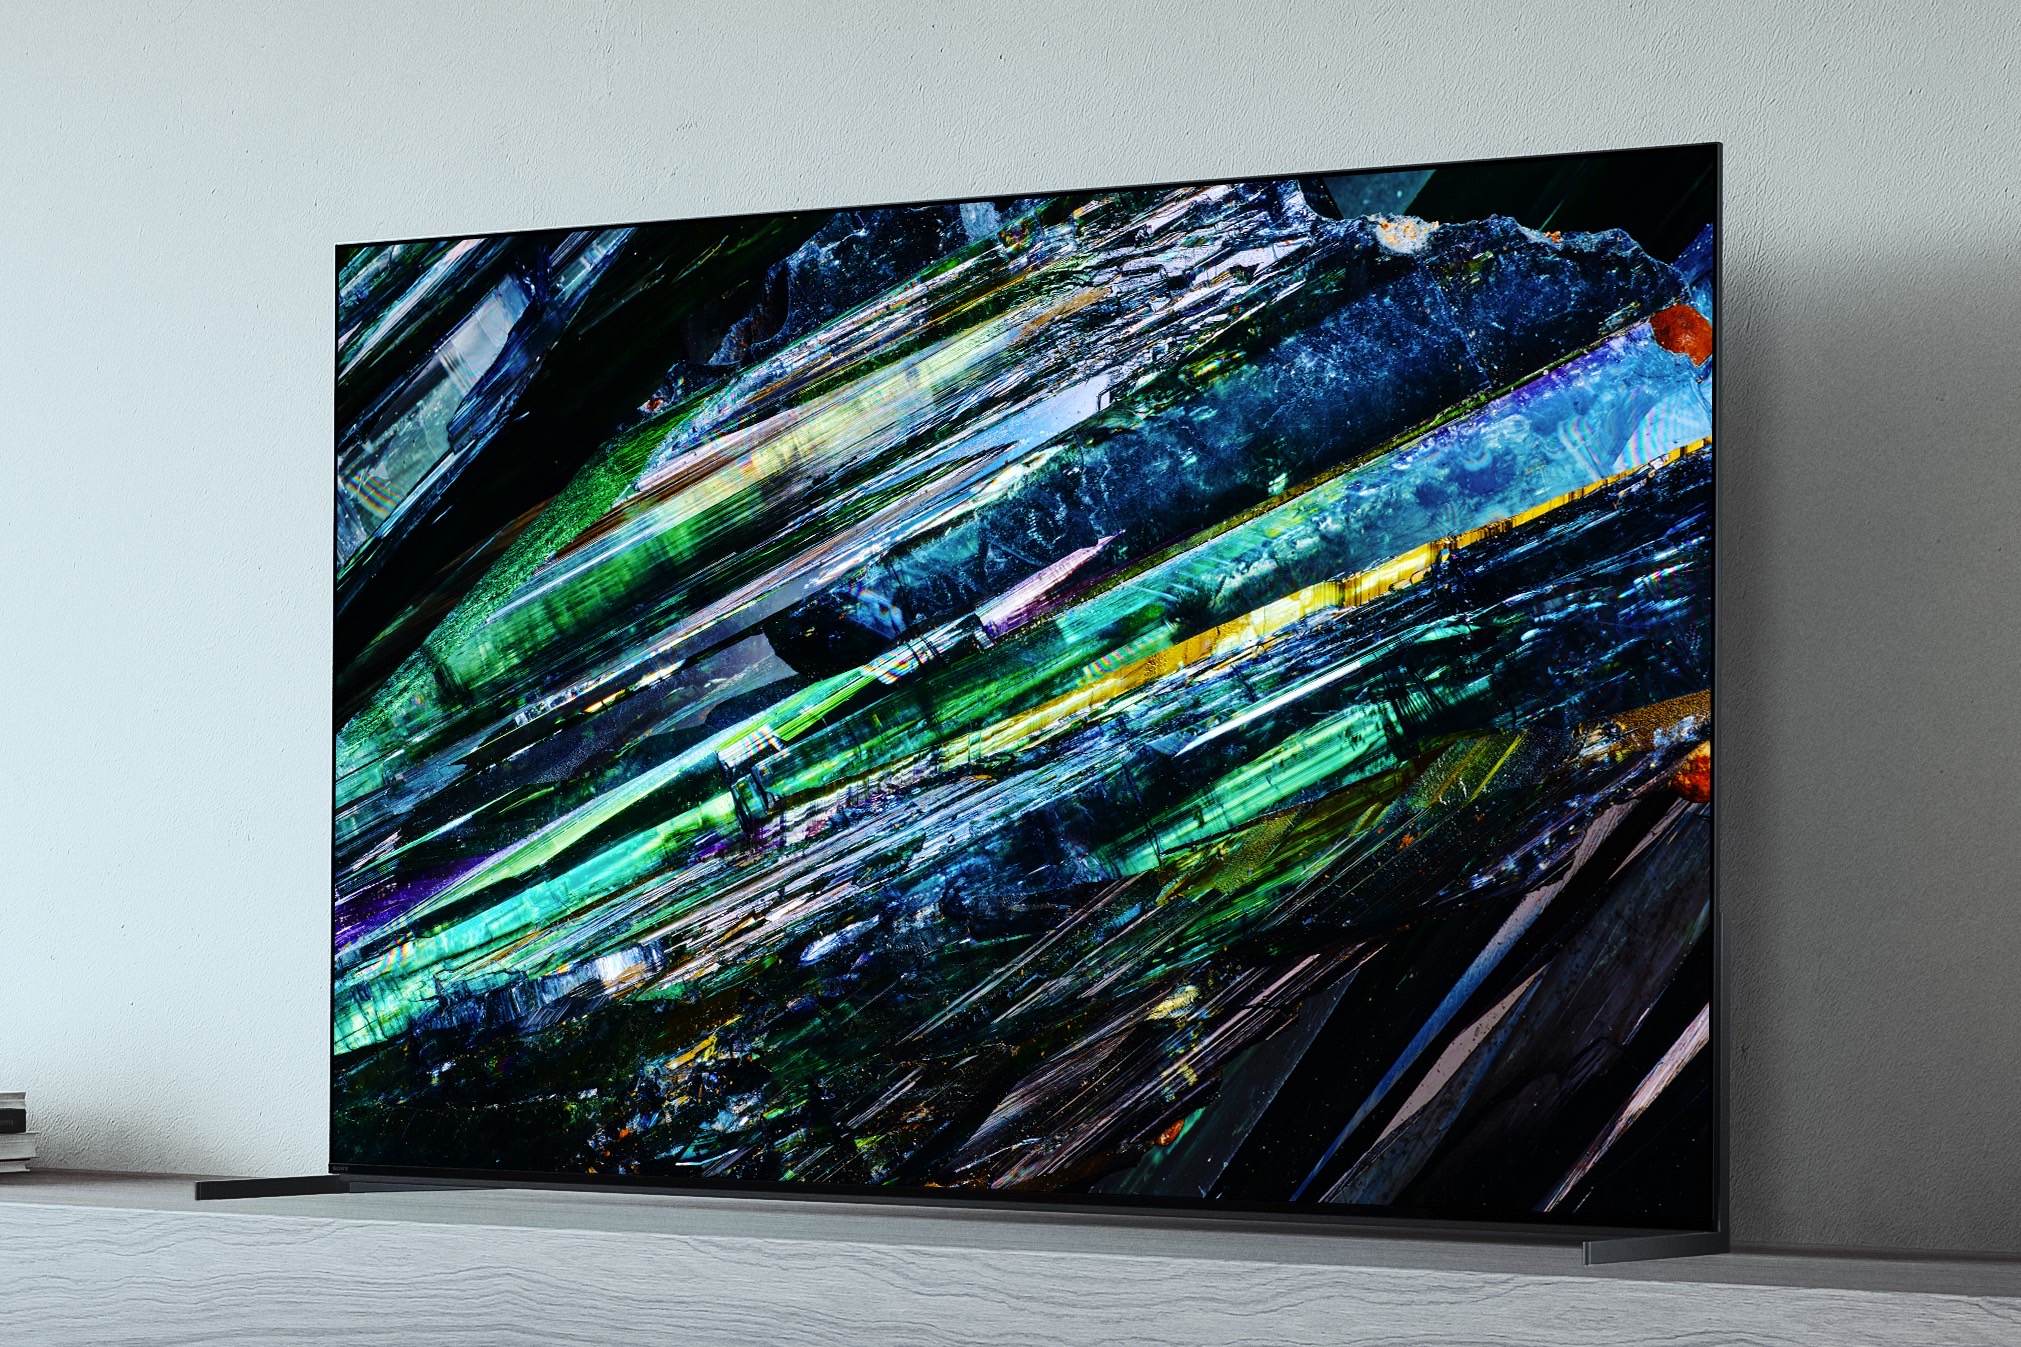 Sony 2023 Bravia XR TV hands-on: Bigger, brighter and even better looking